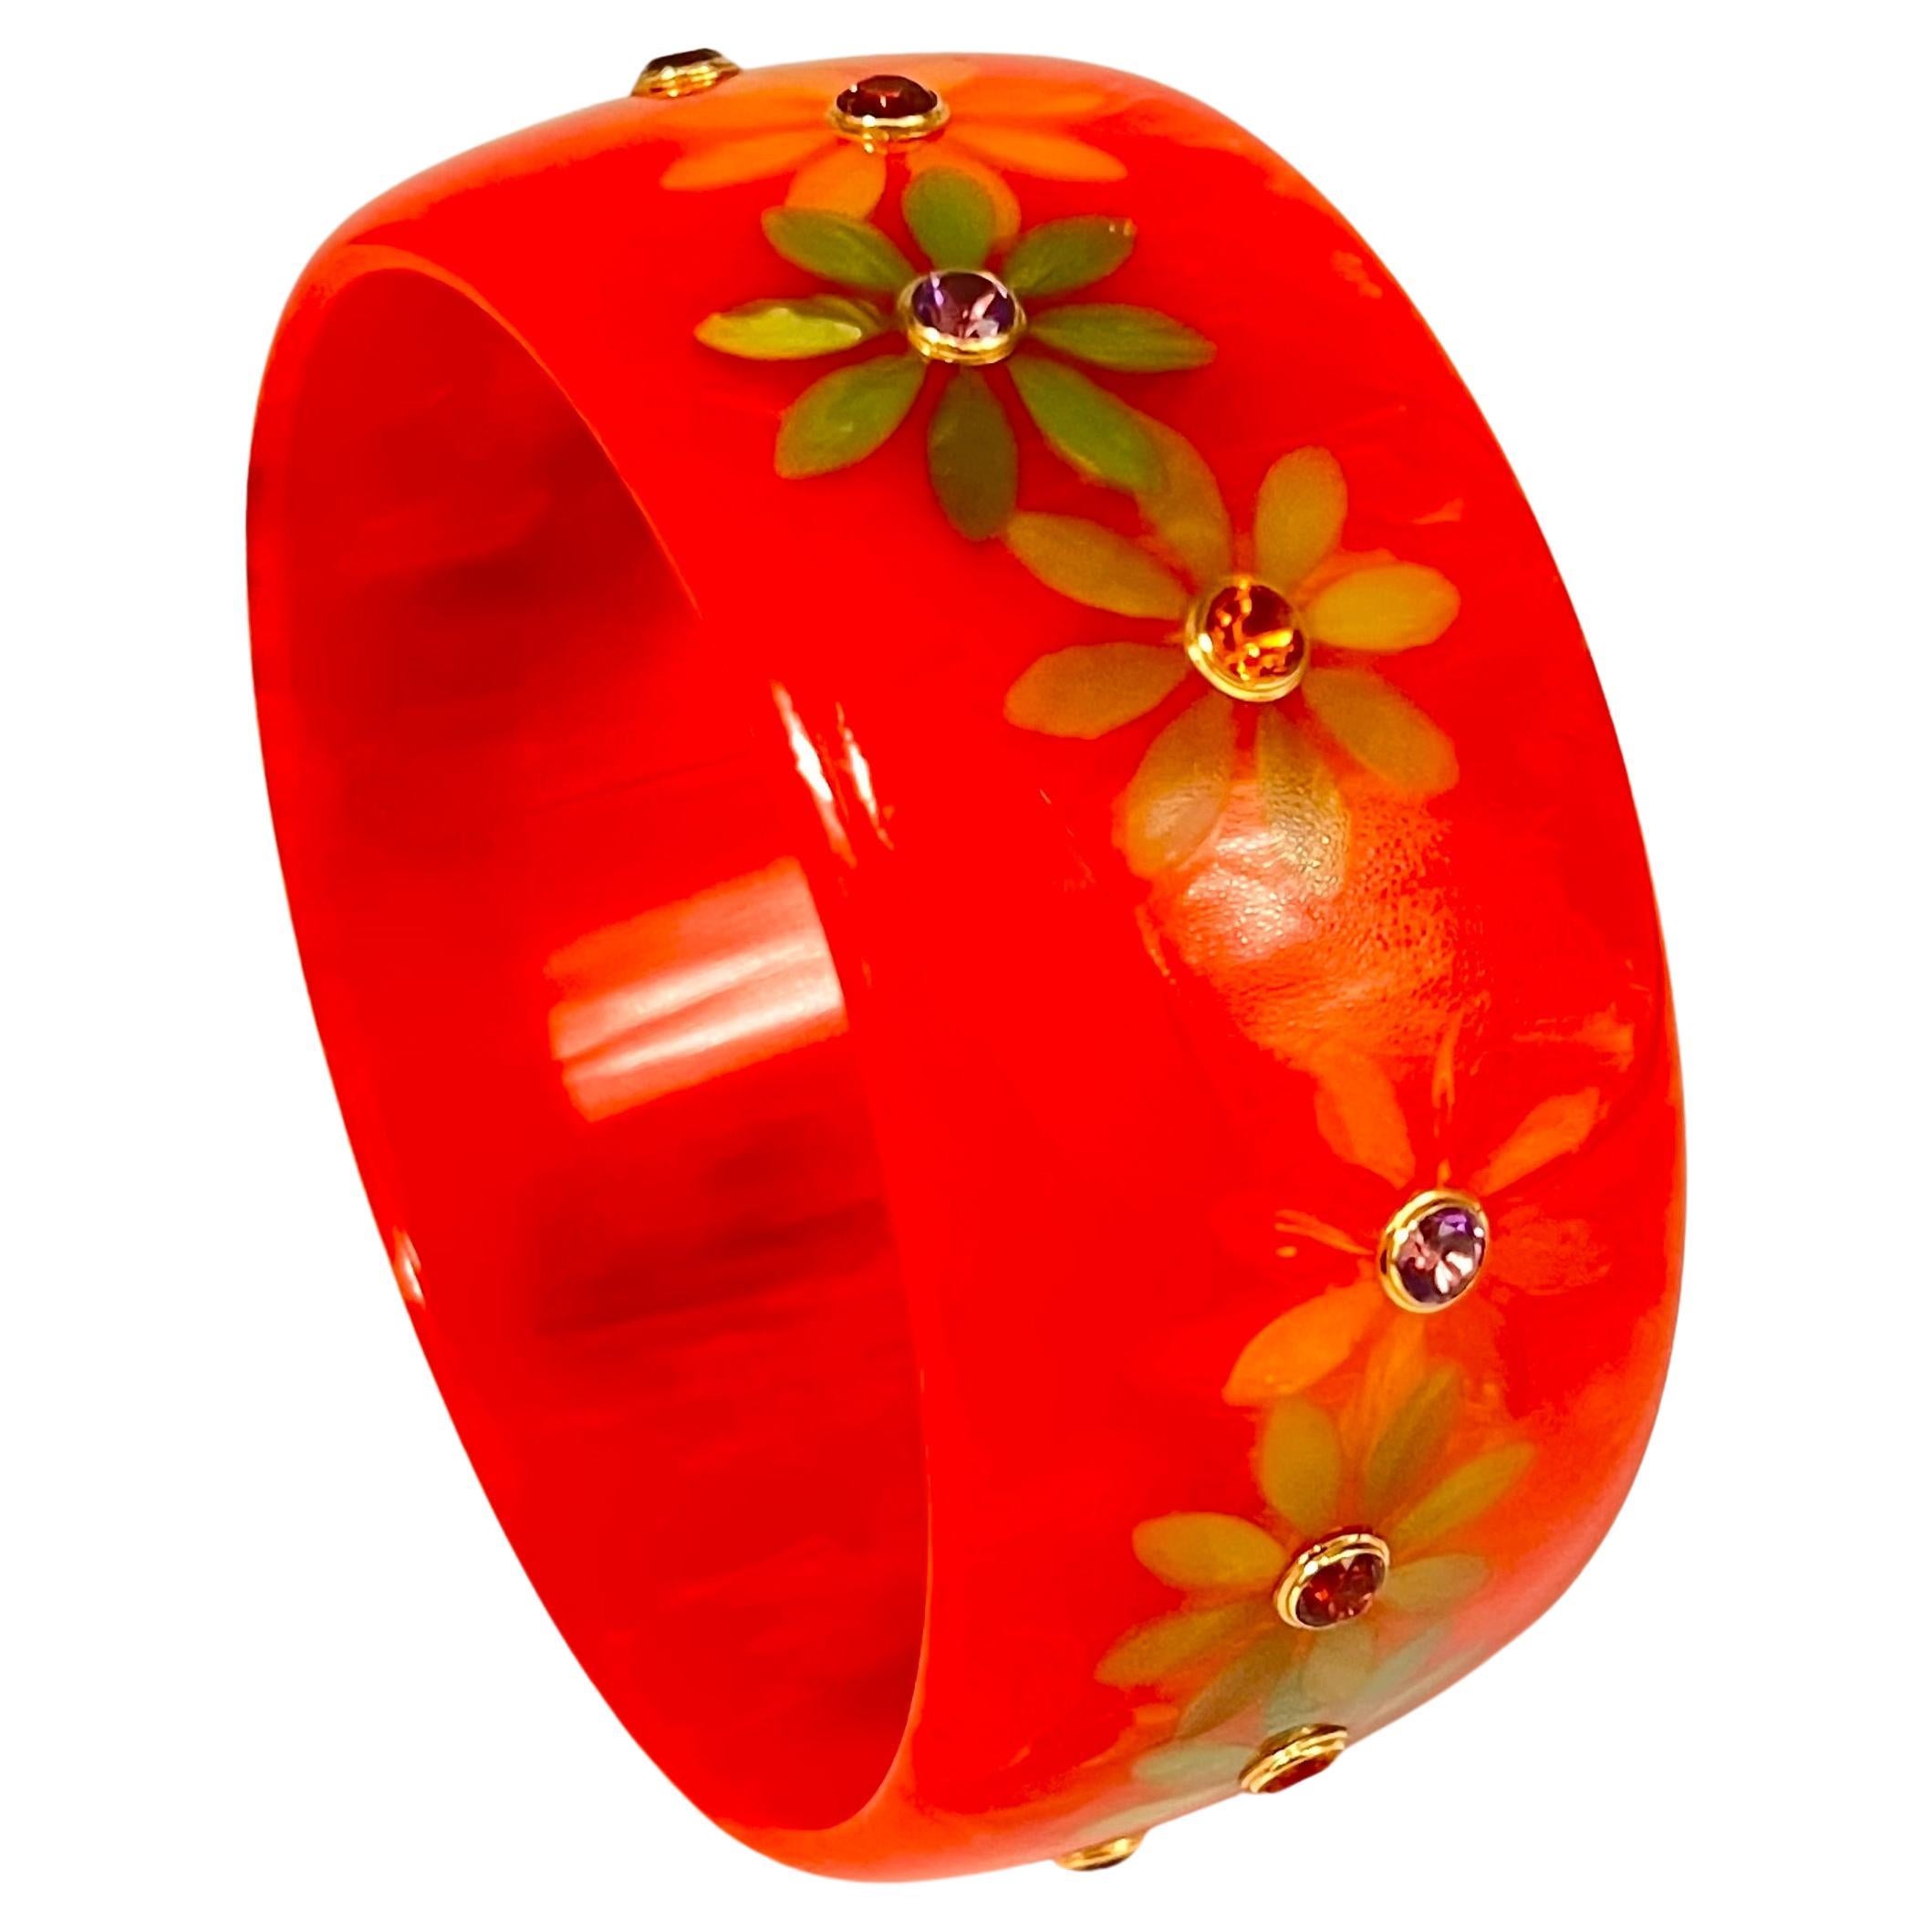 Wide pinkish-orange colored vintage bakelite bangle with inlaid floral-shaped vintage green-oange bakelite, accented by round faceted multi-colored natural gemstones including amethyst, citrine, garnets all bezel-set in 18k yellow gold mounts. 